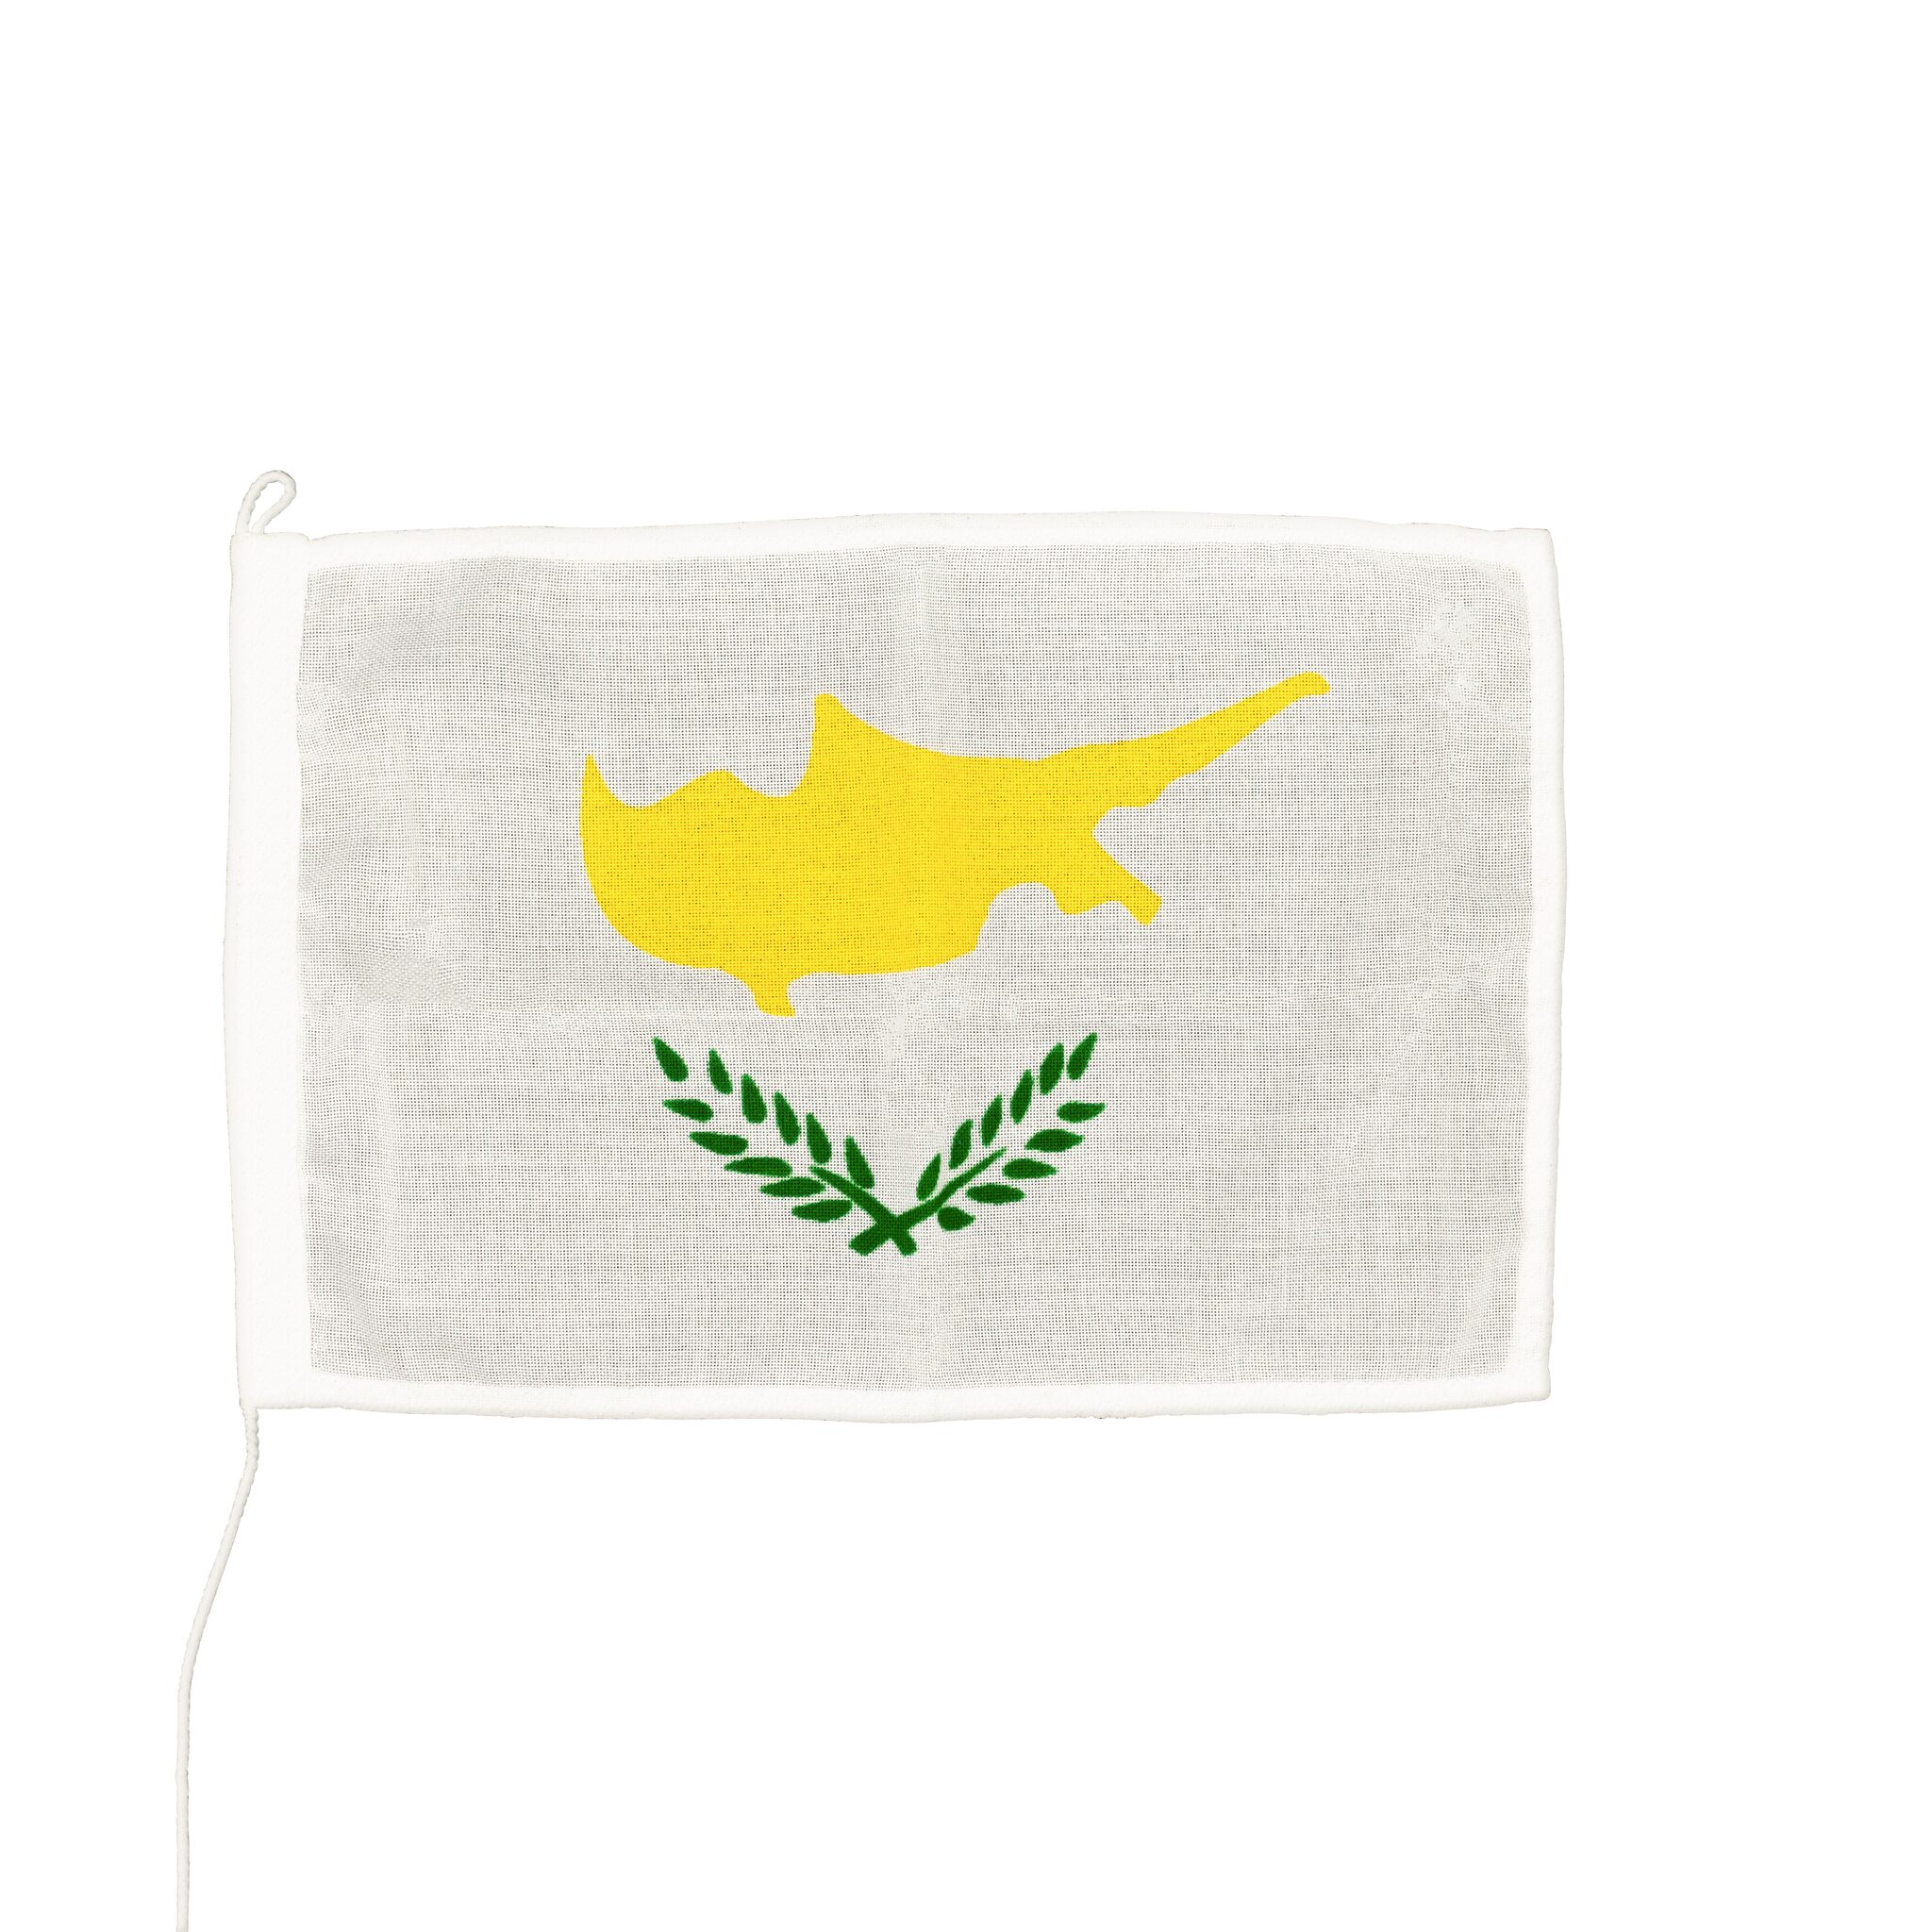 Guest country flag Cyprus